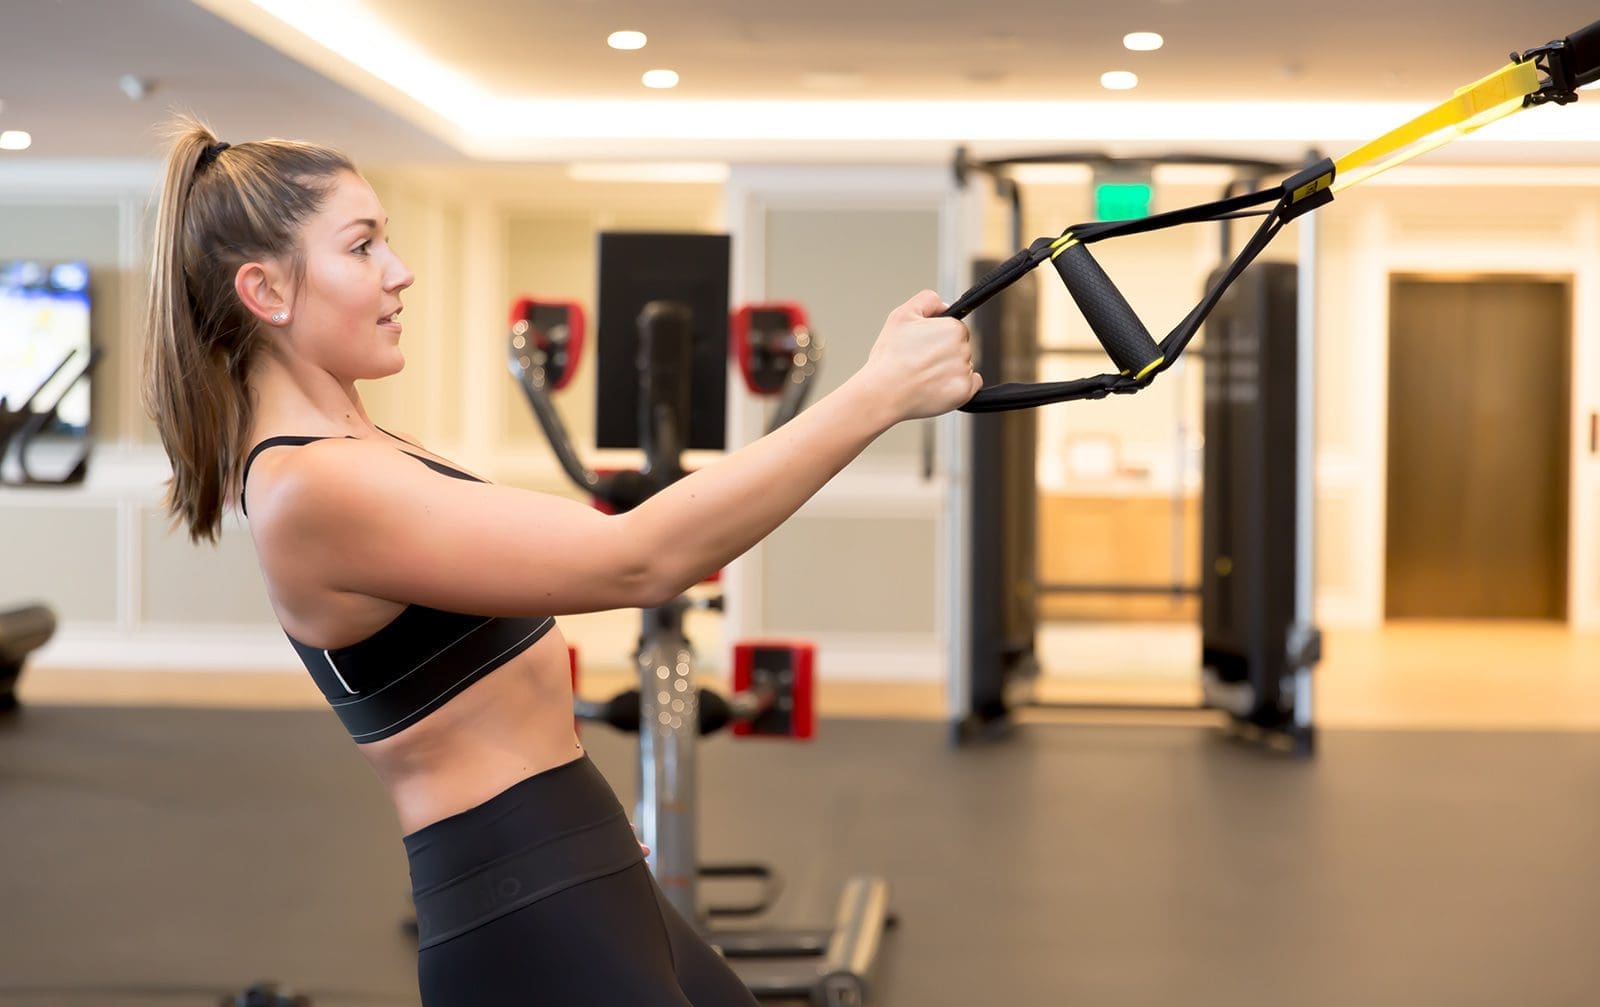 Woman in fitness clothes doing a workout with suspension bands